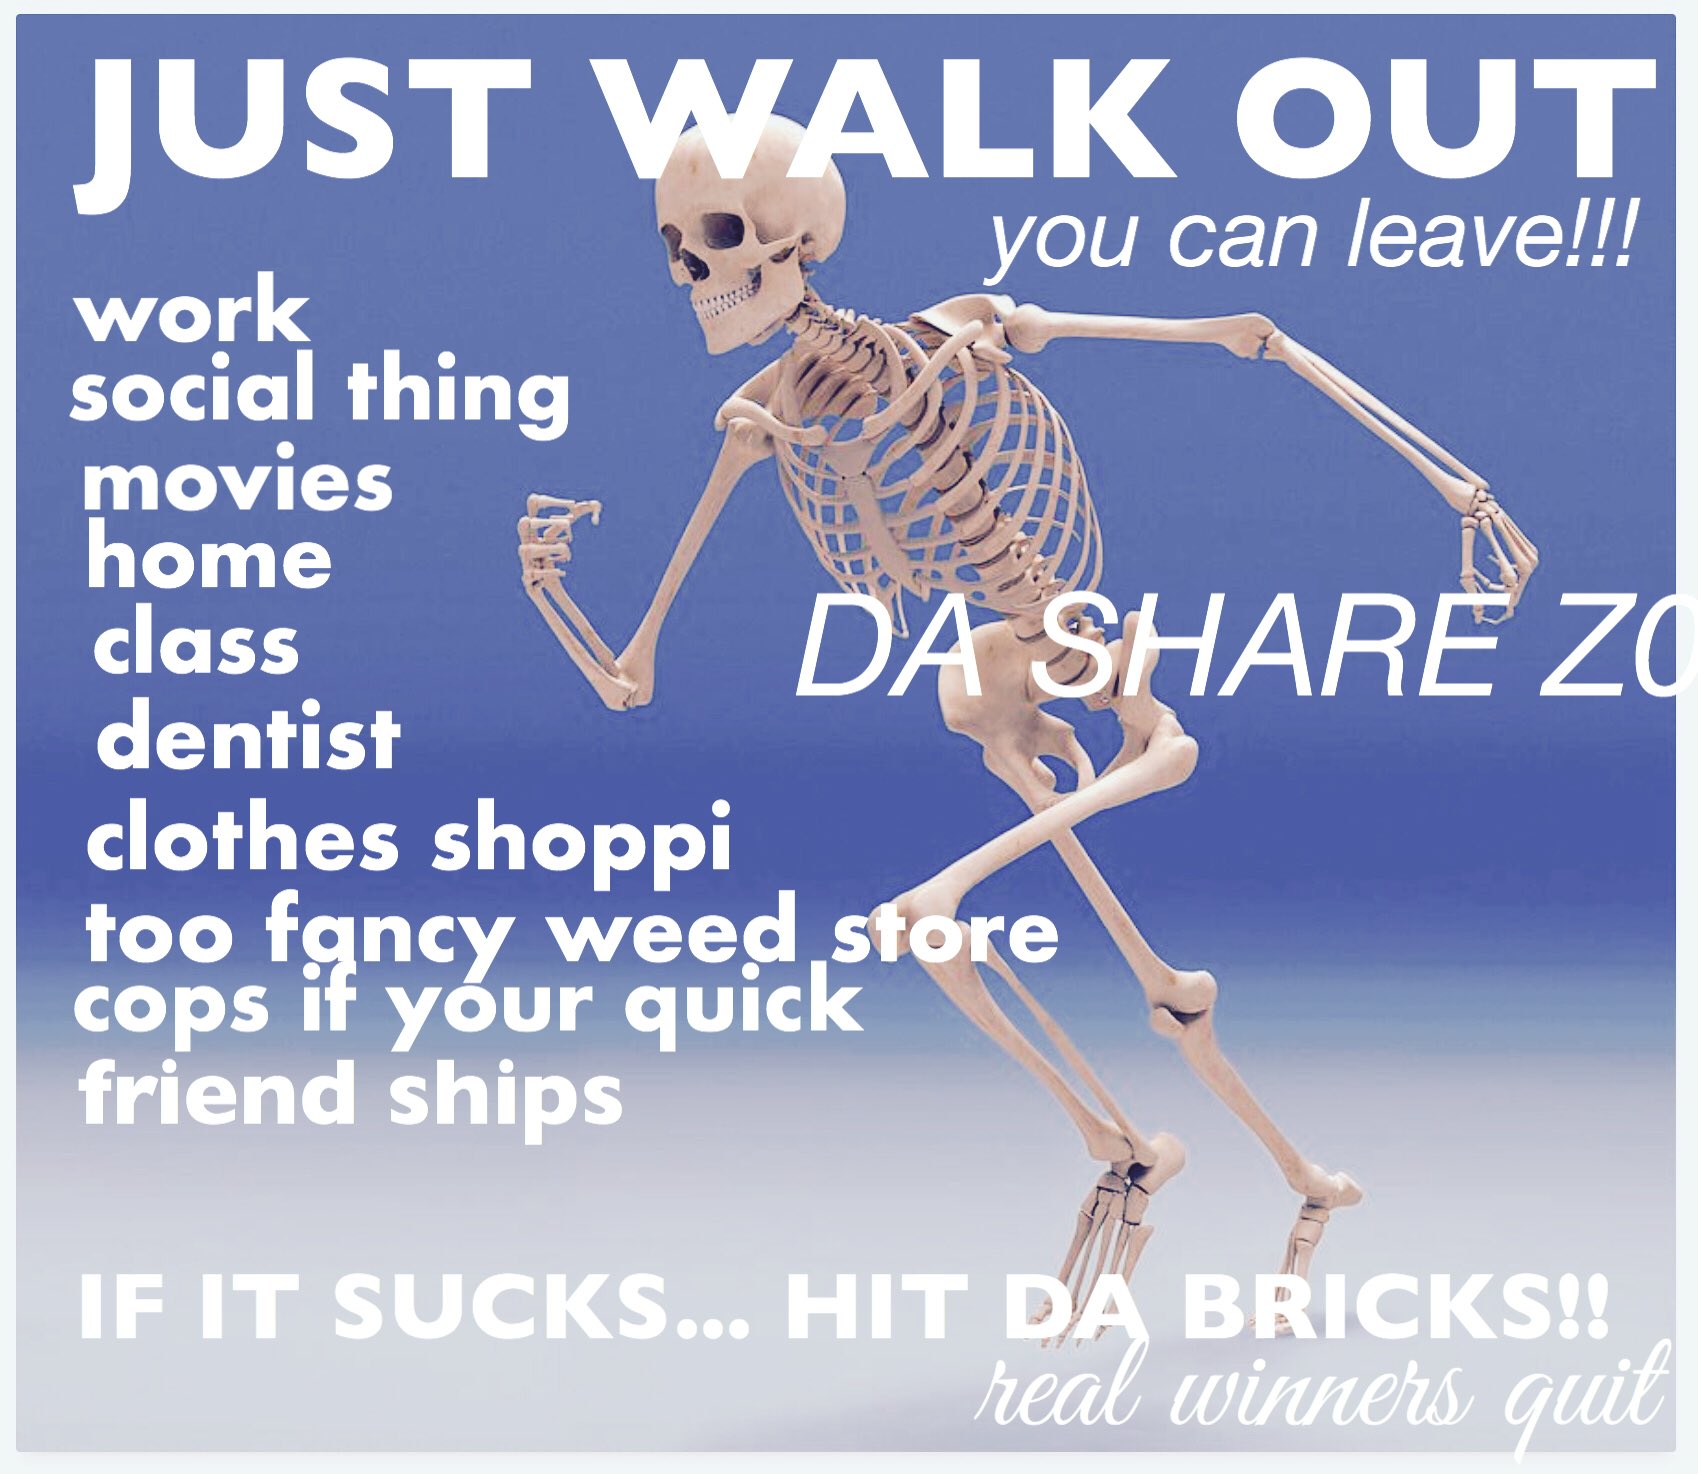 ID: a classic piece by twitter account da share zone with a skeleton sprinting away from his problems. overlaid text says, JUST WALK OUT, you can leave!!! work, social thing, movies, home, class, dentist, clothes shoppi, too fancy weed store, cops if your quick, friend ships. IF IT SUCKS... HIT DA BRICKS!! real winners quit. some words are misspelled or cut off. end description.